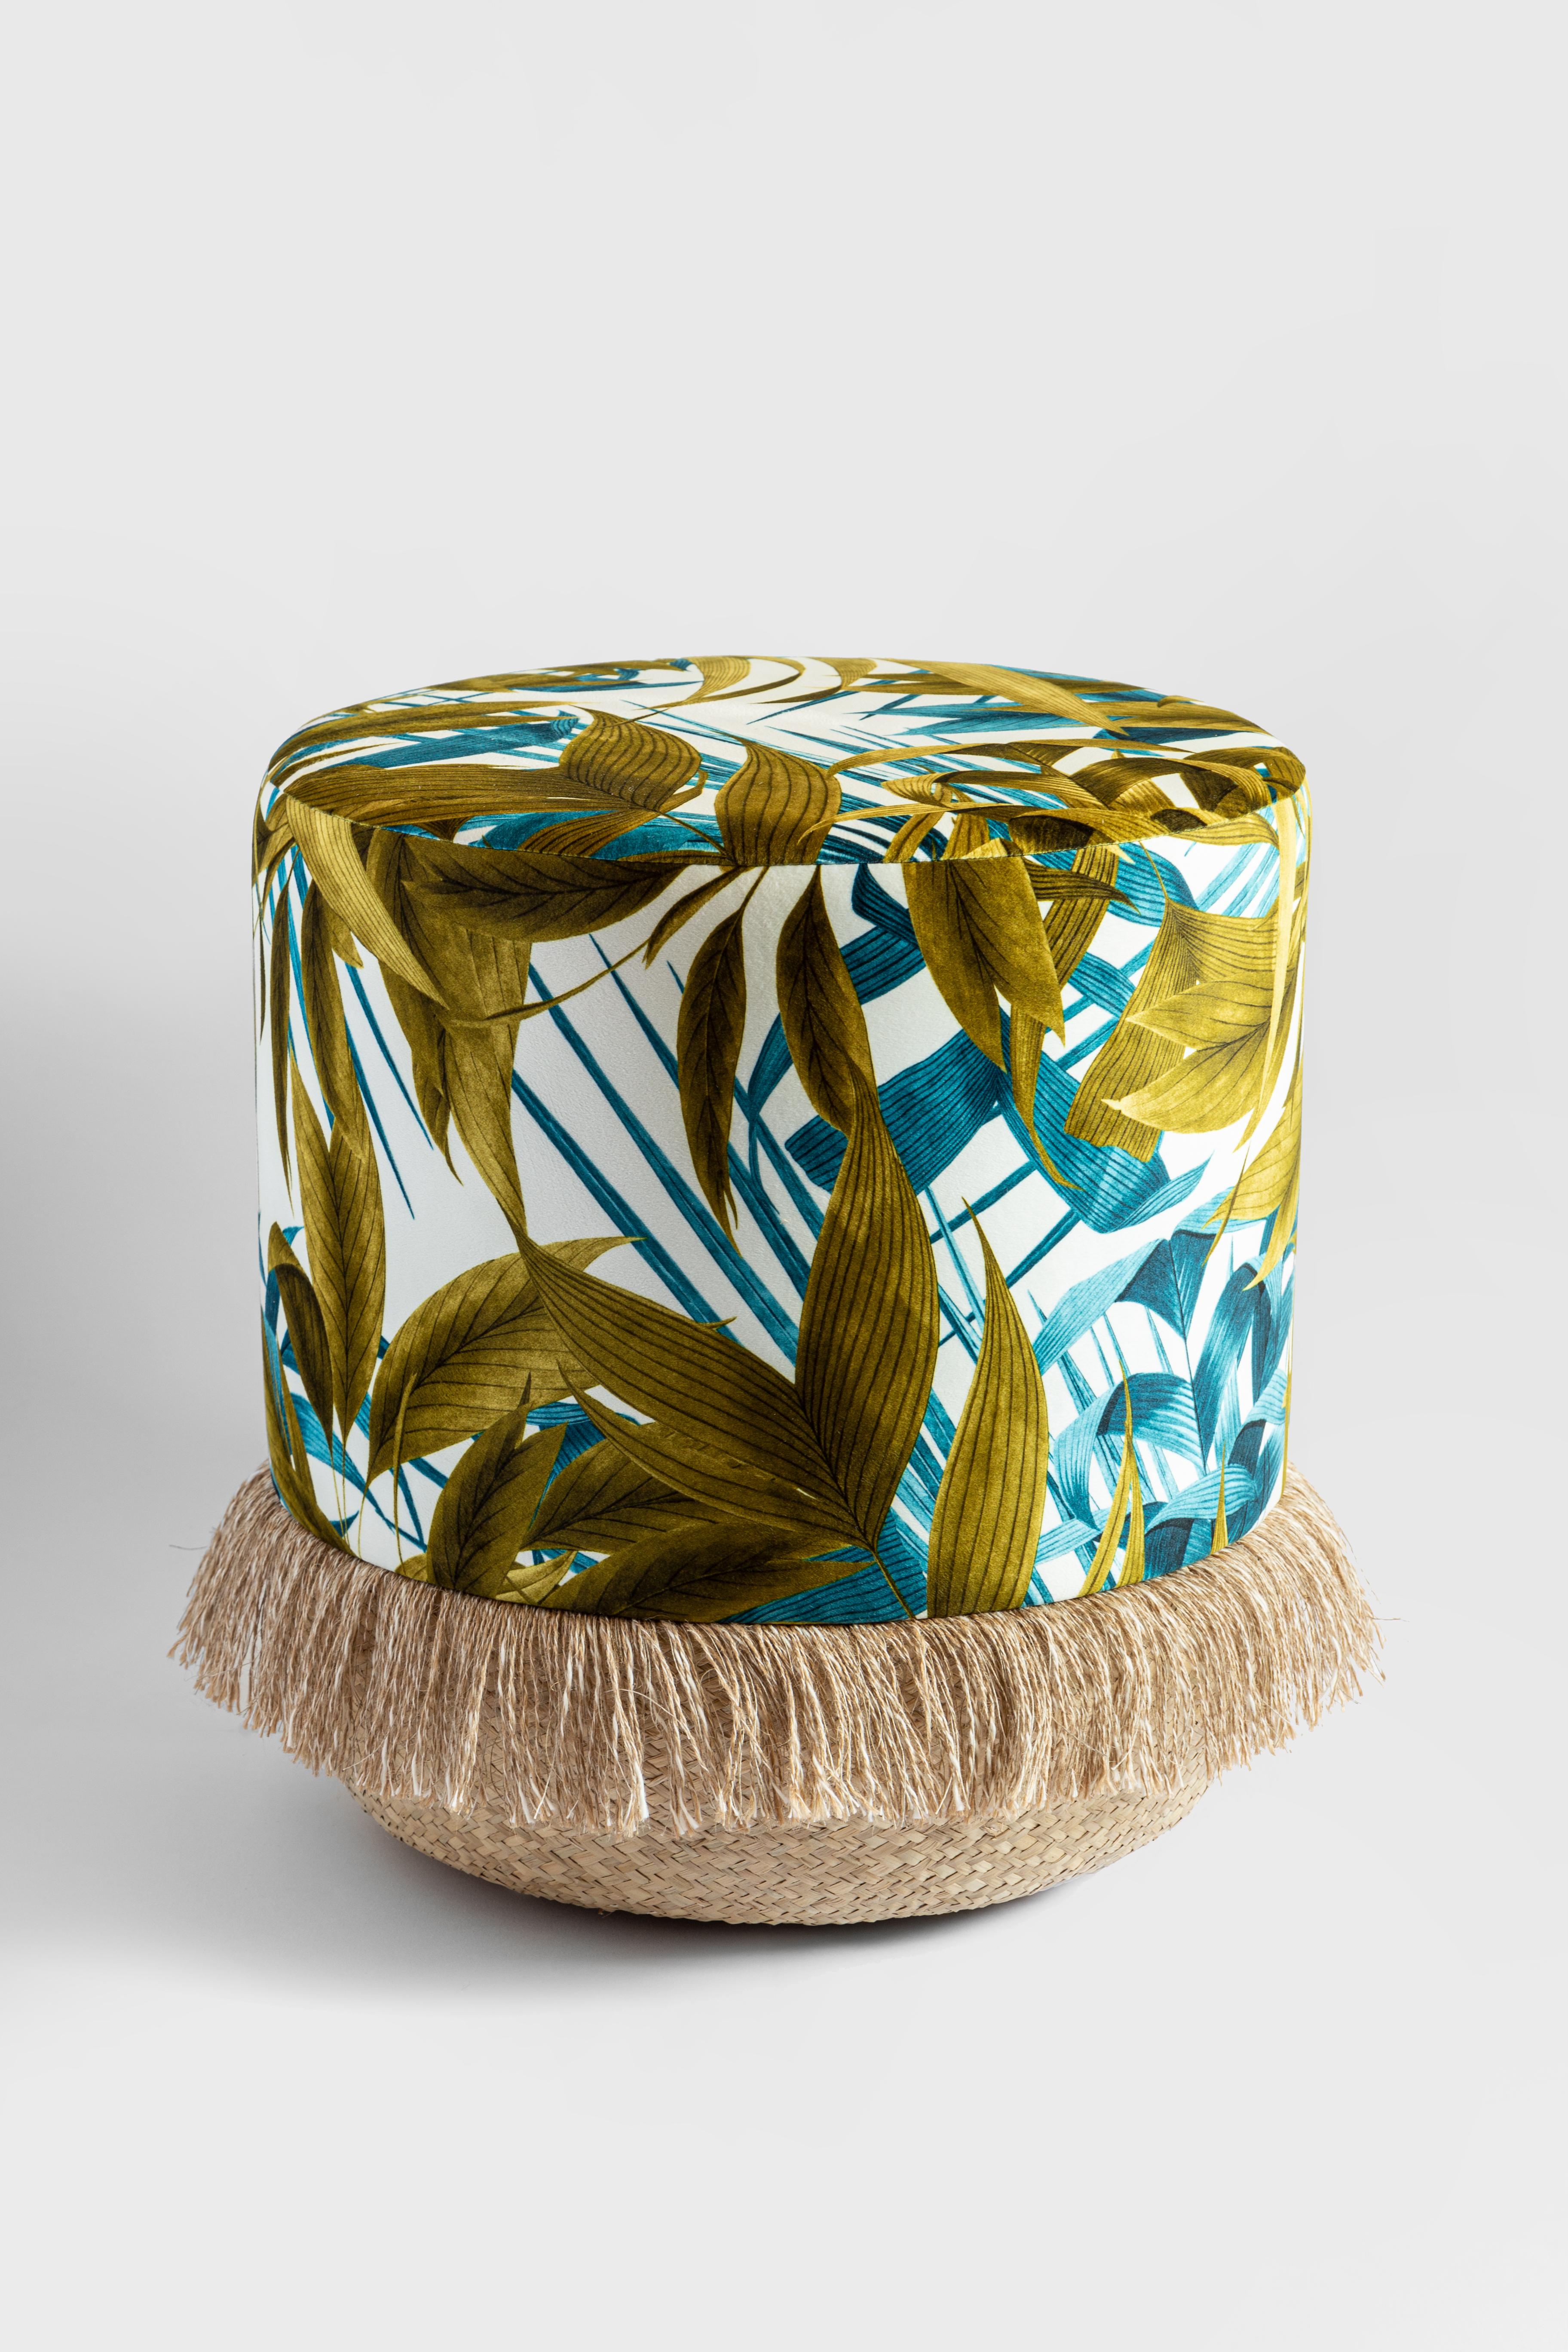 Pouf handmade by Italian expert craftsmen. High quality straw base and printed velvet covering.
The blue and ocher palm leaves completely envelop the surface of the pouf.